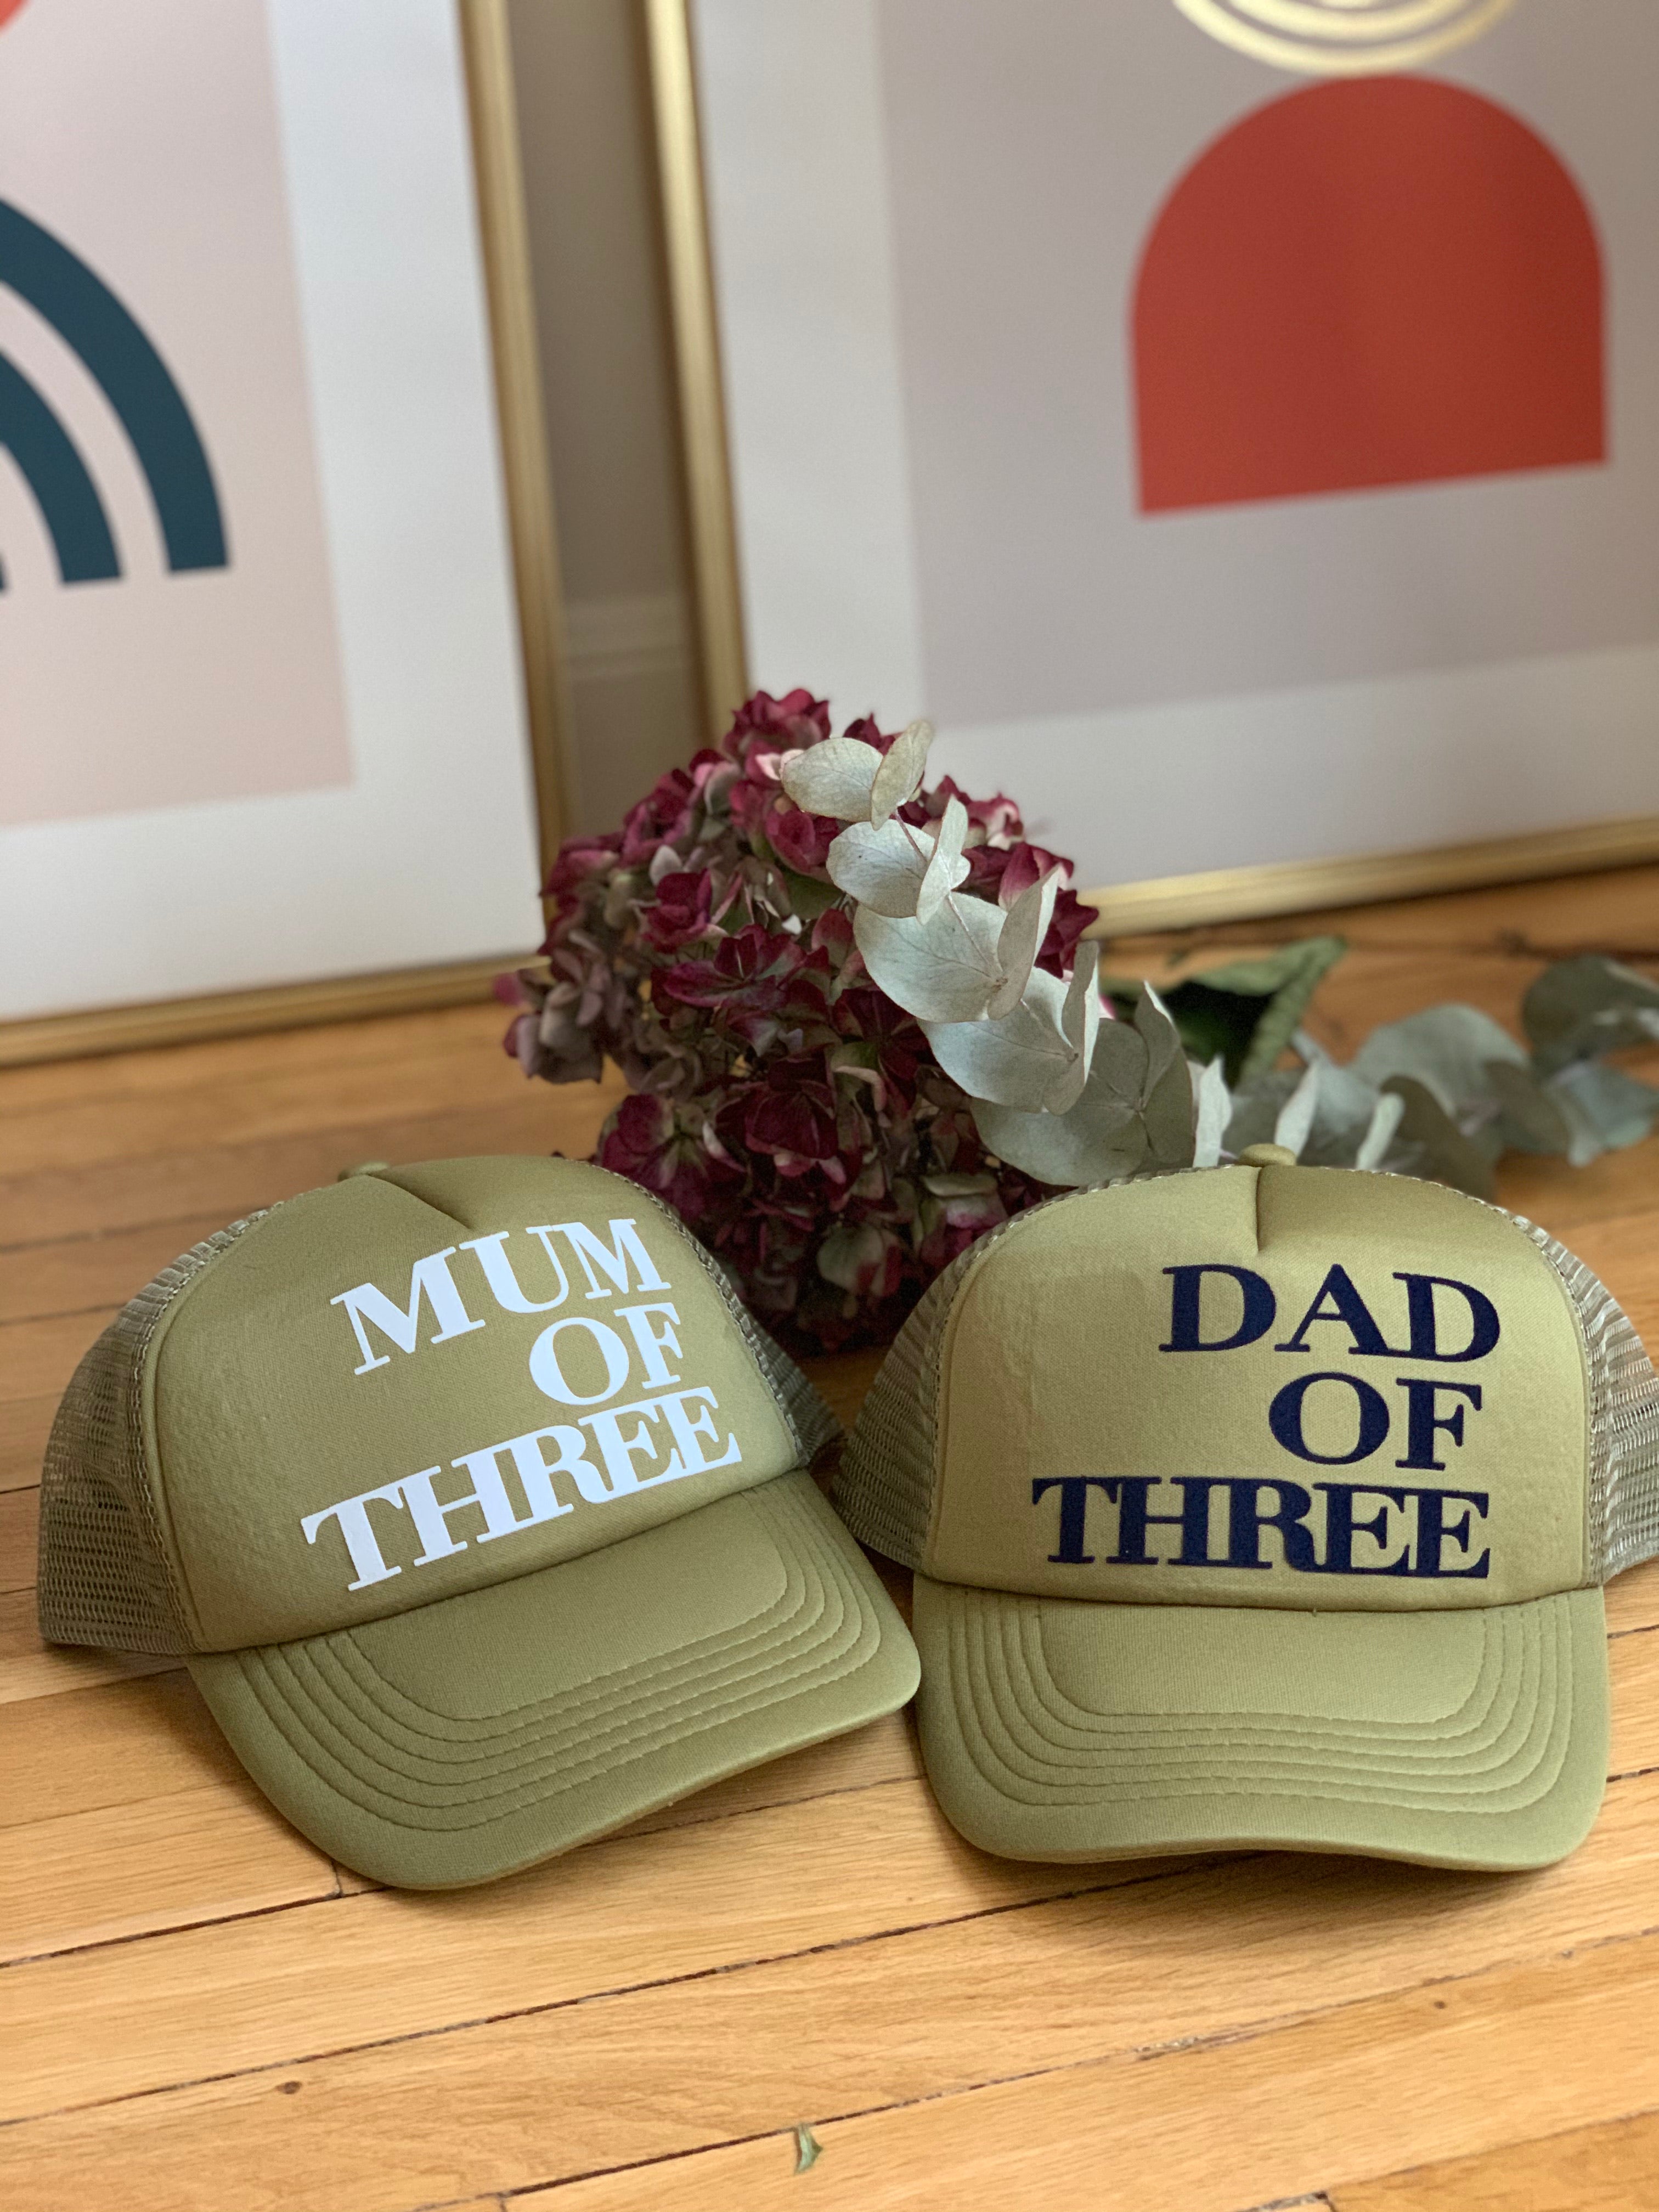 DAD OF CAP - KHAKI - Available for DAD OF ONE, TWO, THREE...